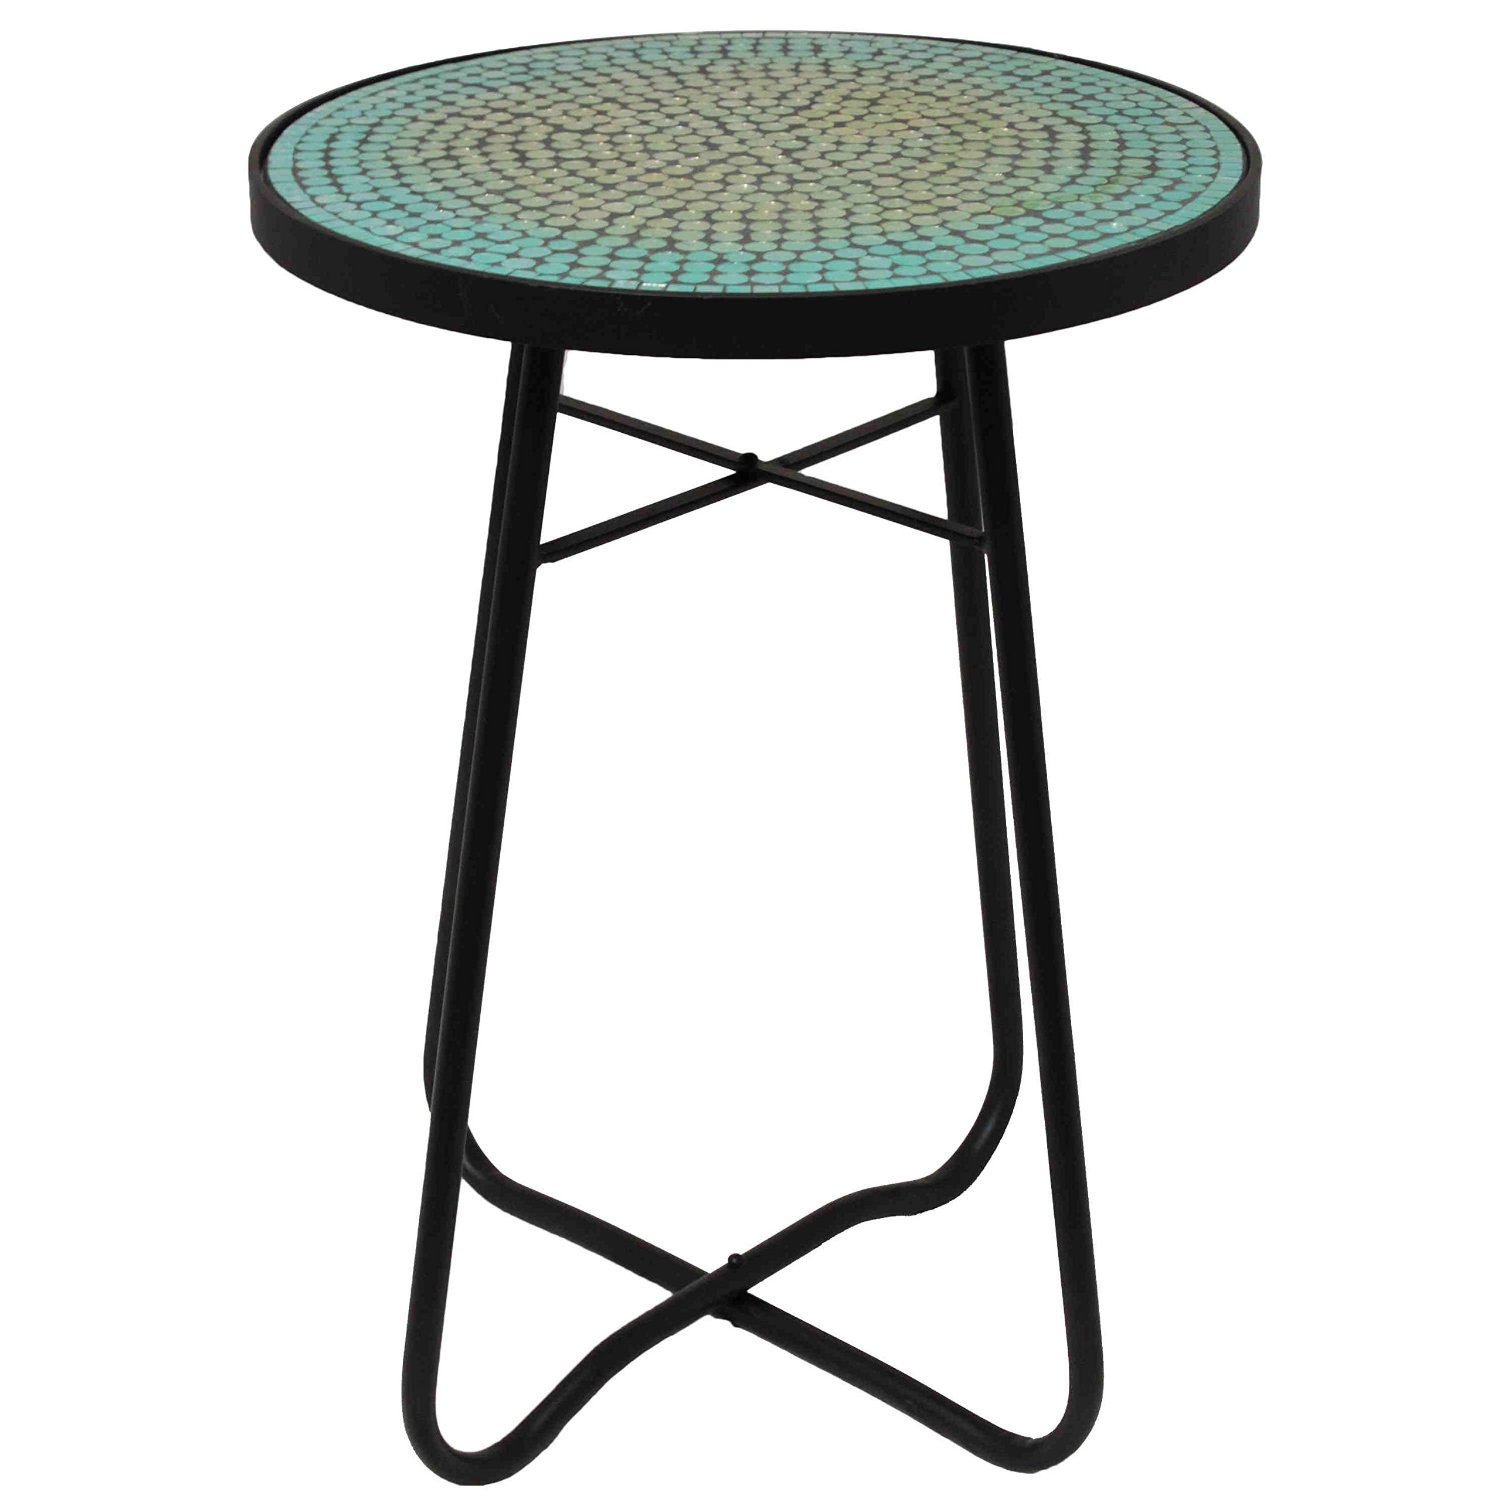 round glass accent table find threshold mosaic get quotations side contemporary style crafted windham door cabinet lavita furniture wall file organizer ikea outdoor closet wood